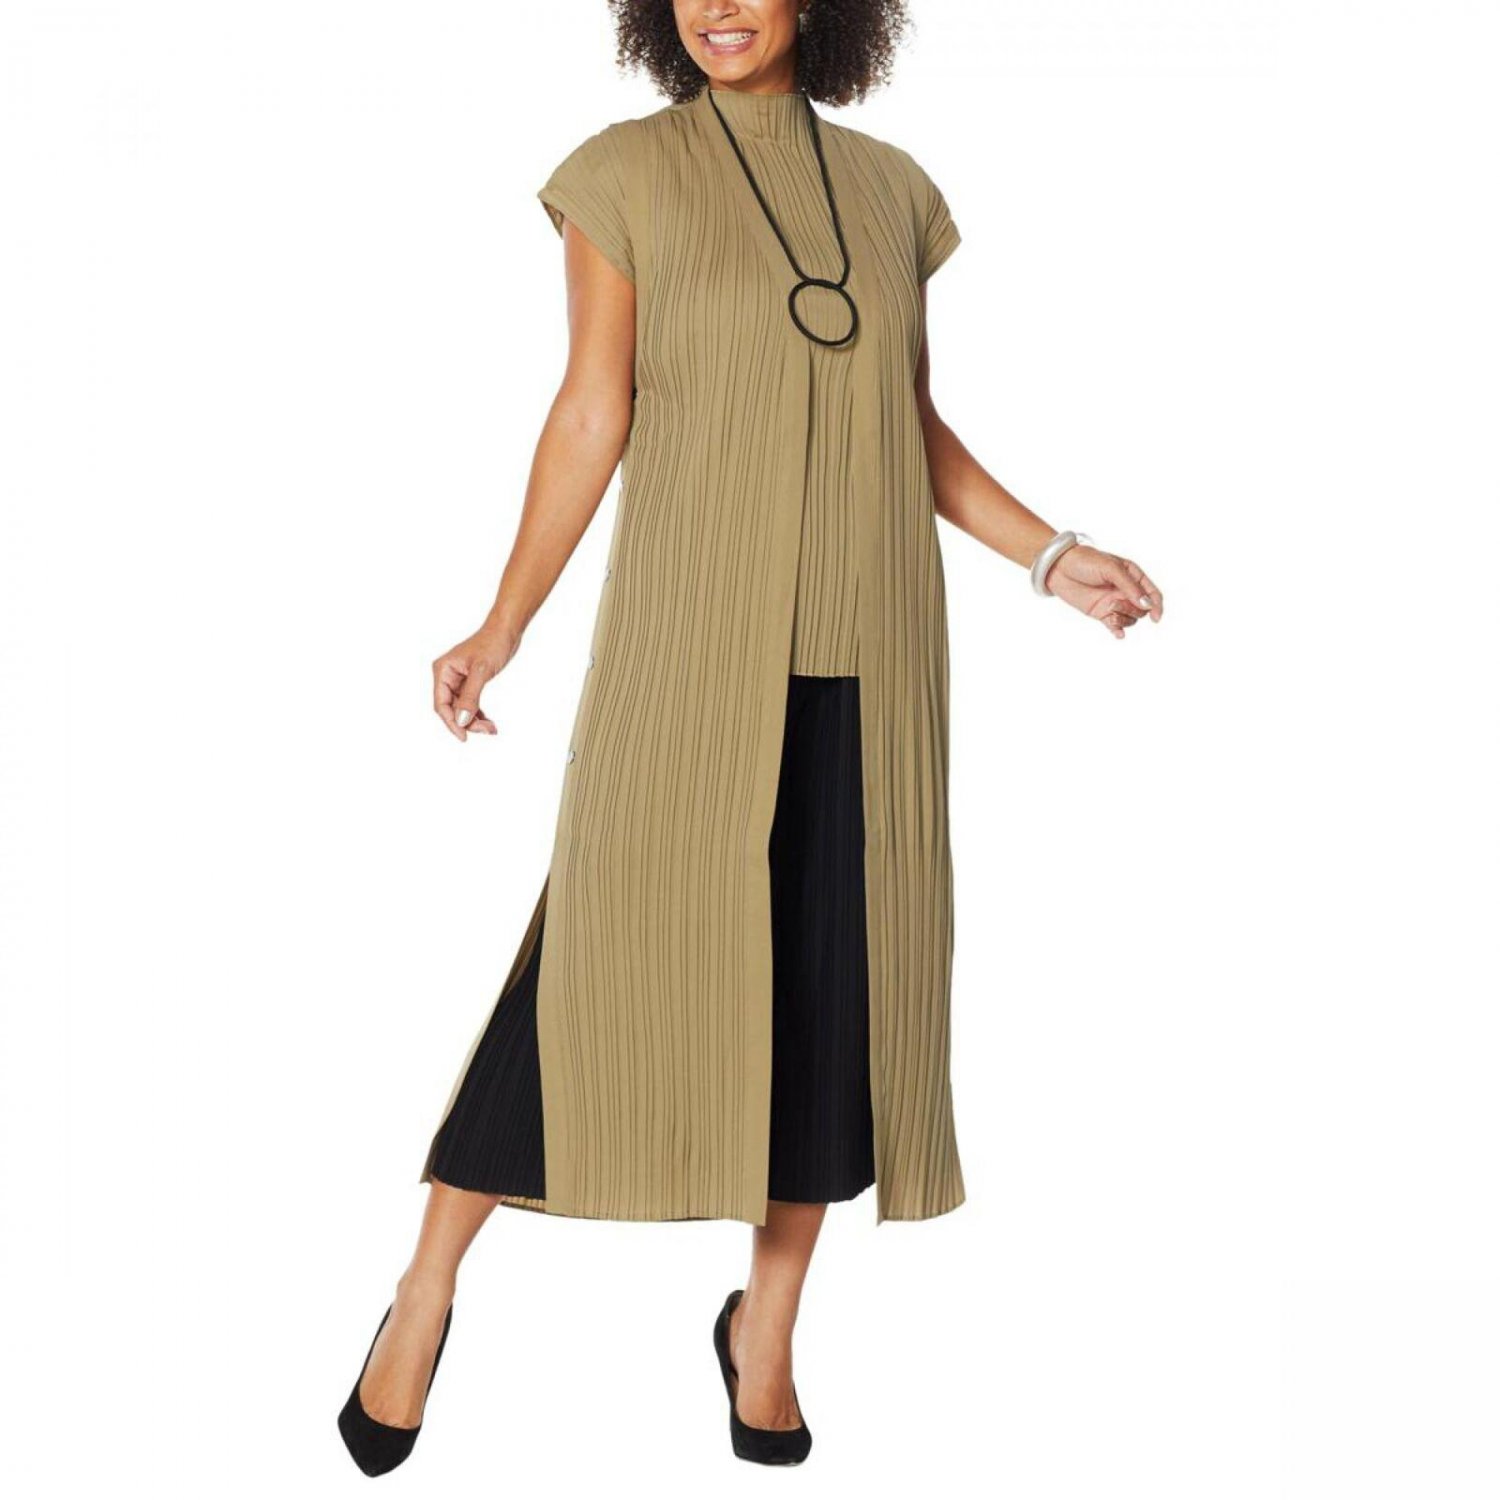 NWT Marla Wynne Womens Pleated Sleeveless Duster with Side Snaps Light Olive Gray XS